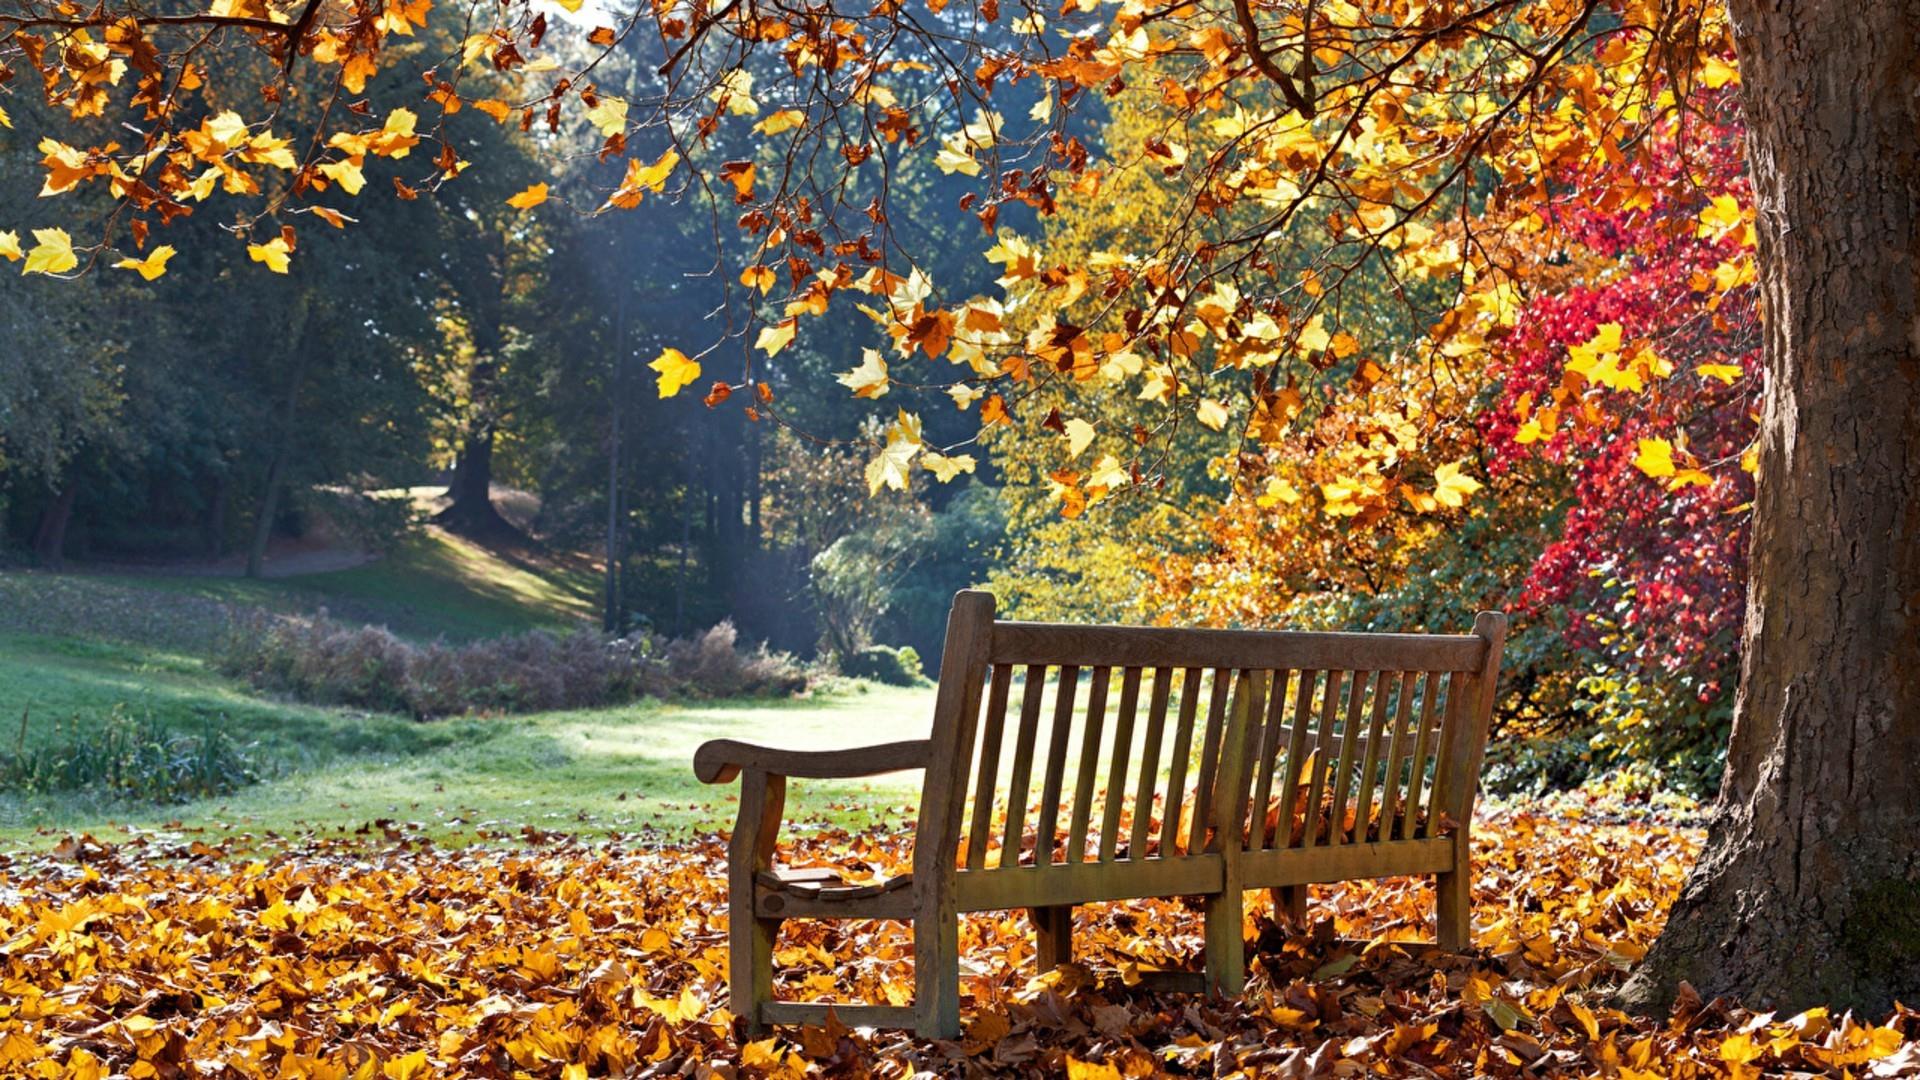 Bench in the autumn park wallpaper - backiee